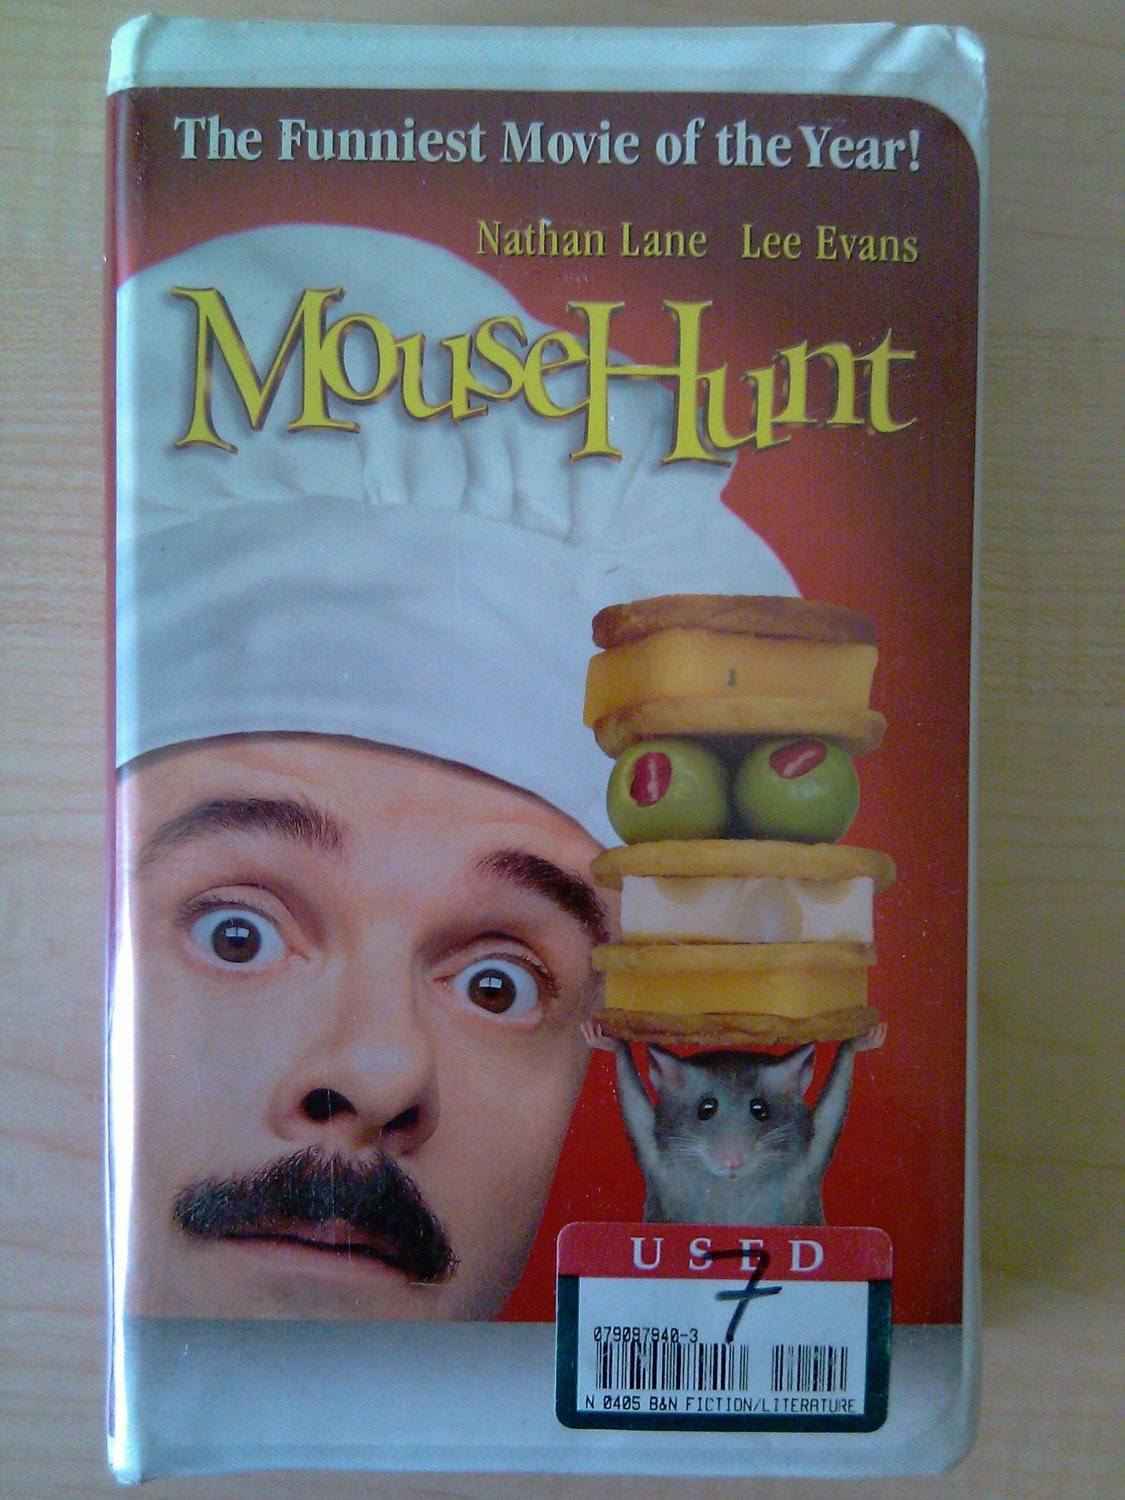 Mouse hunt VHS video 1997 clamshell case. ^^^ 